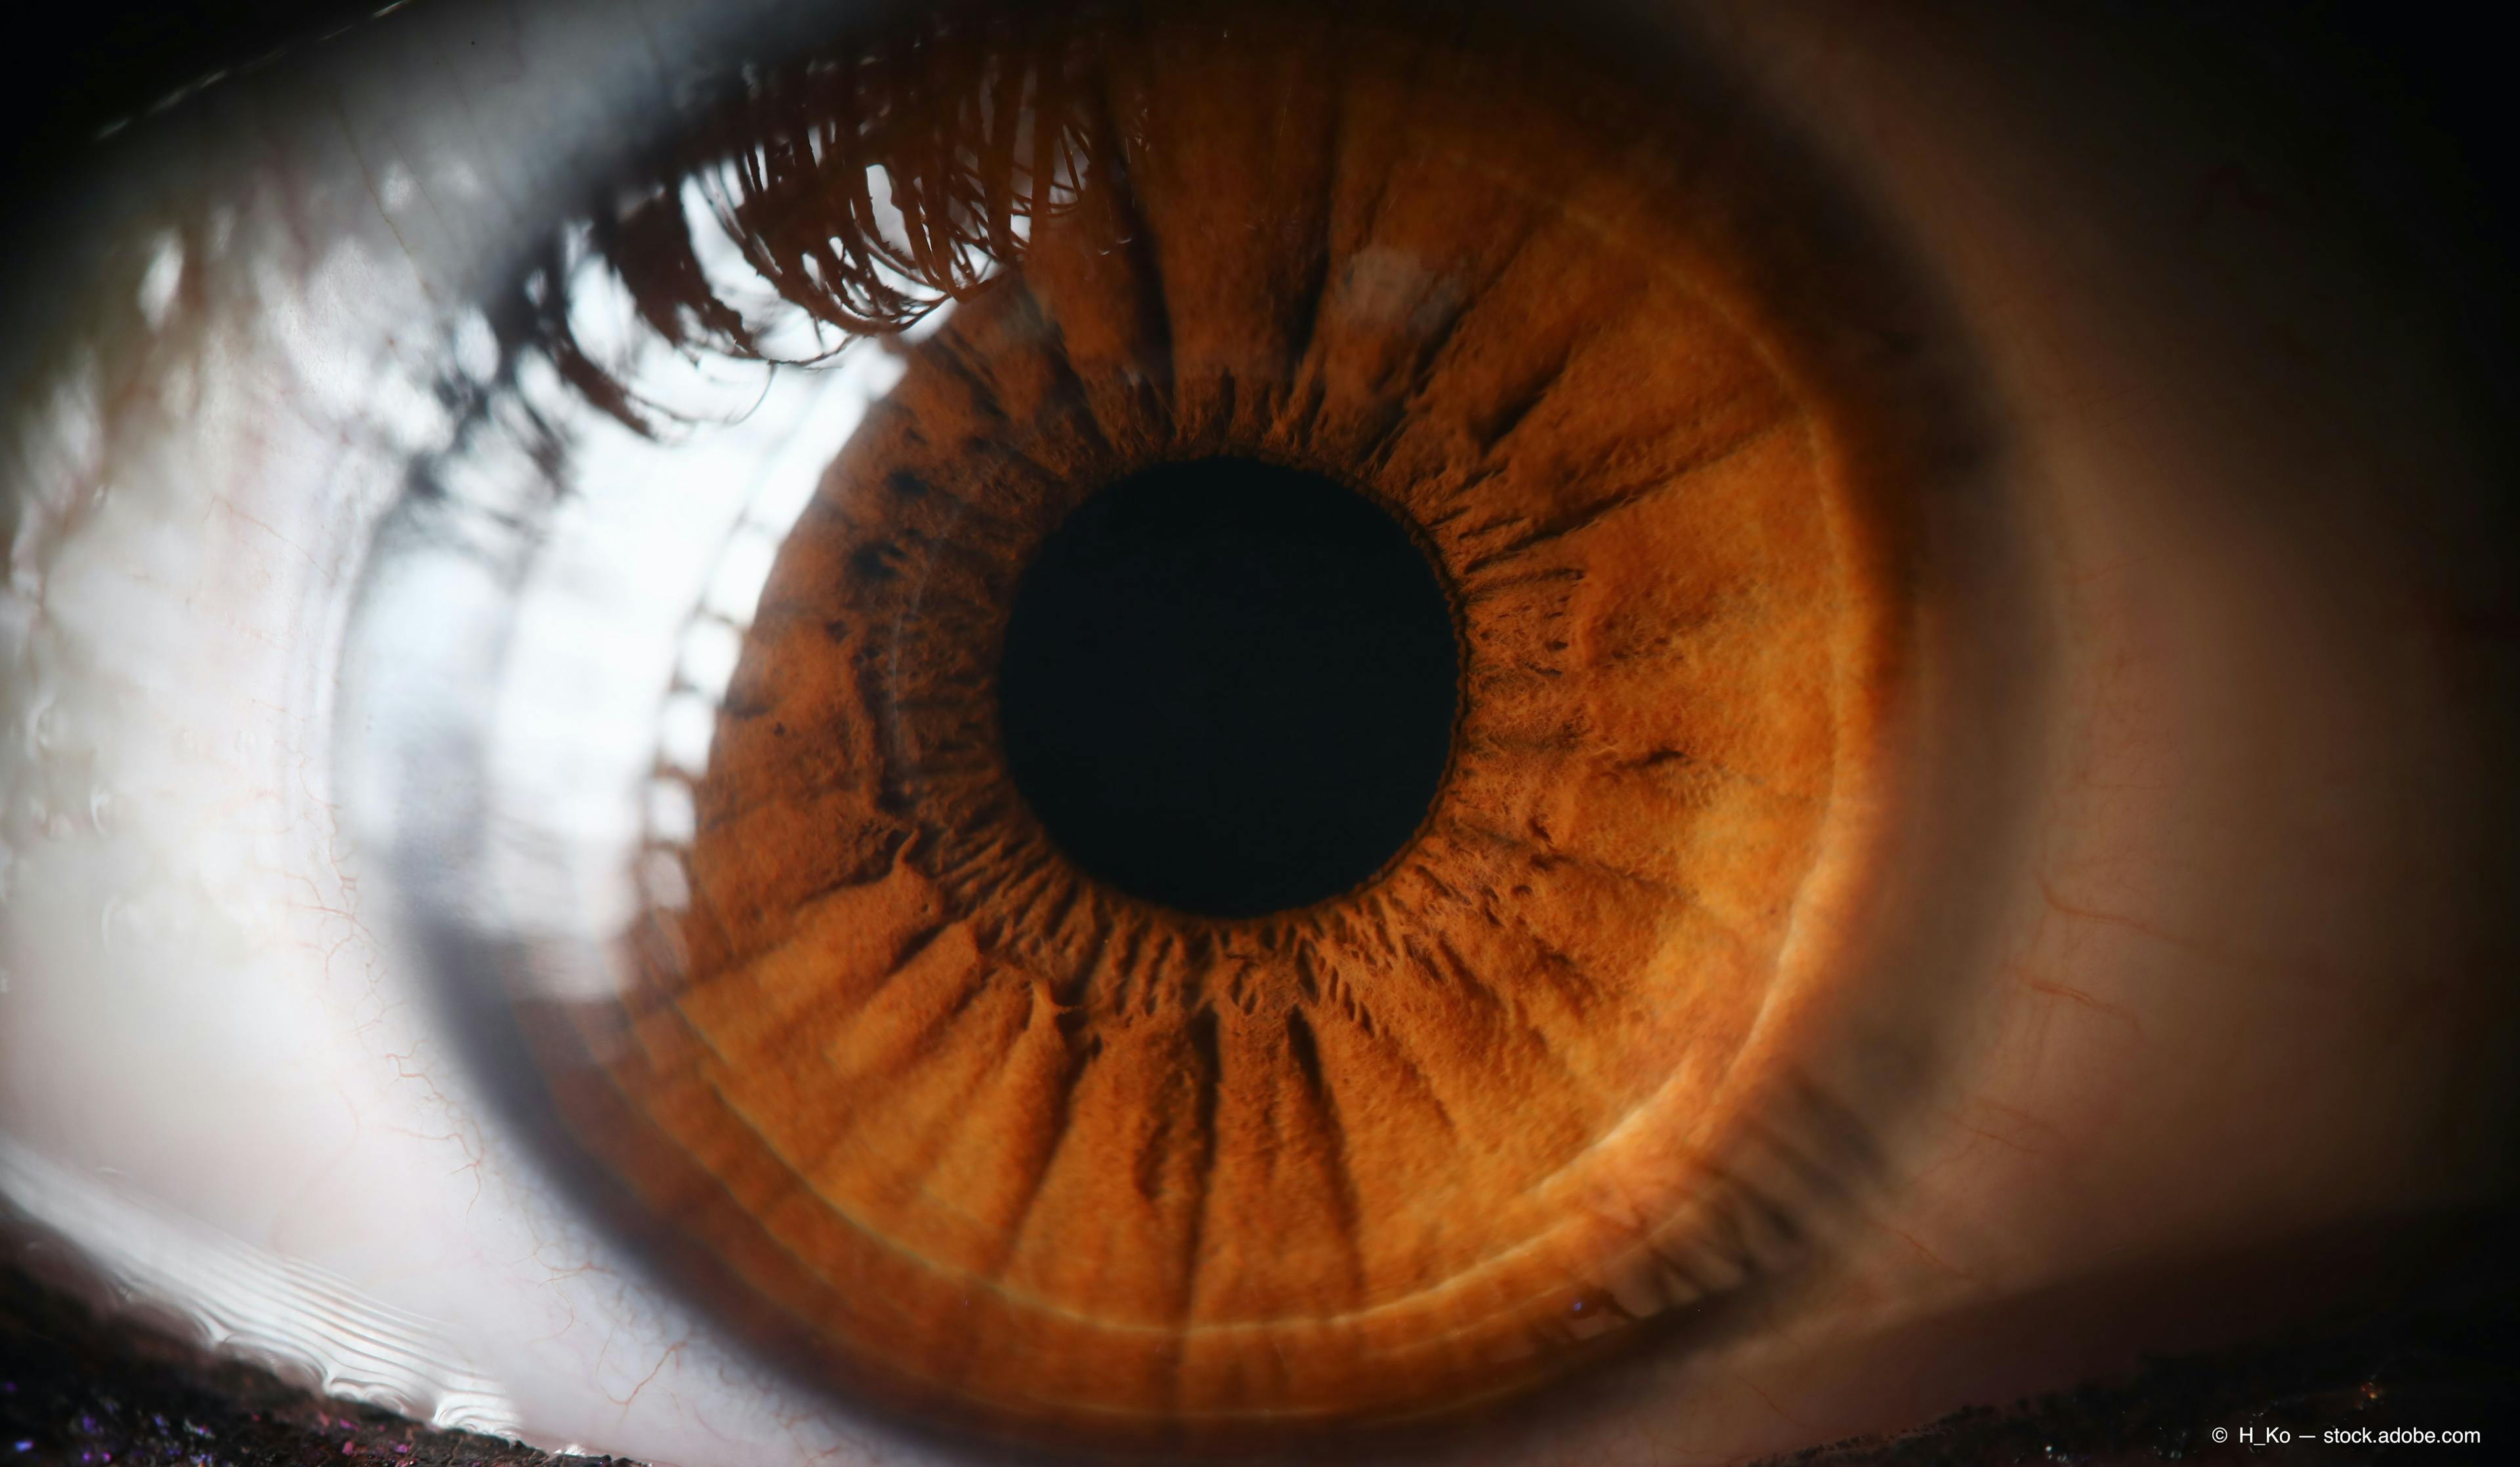 Protocol T Extension Study shows long-term visual declines in DME eyes